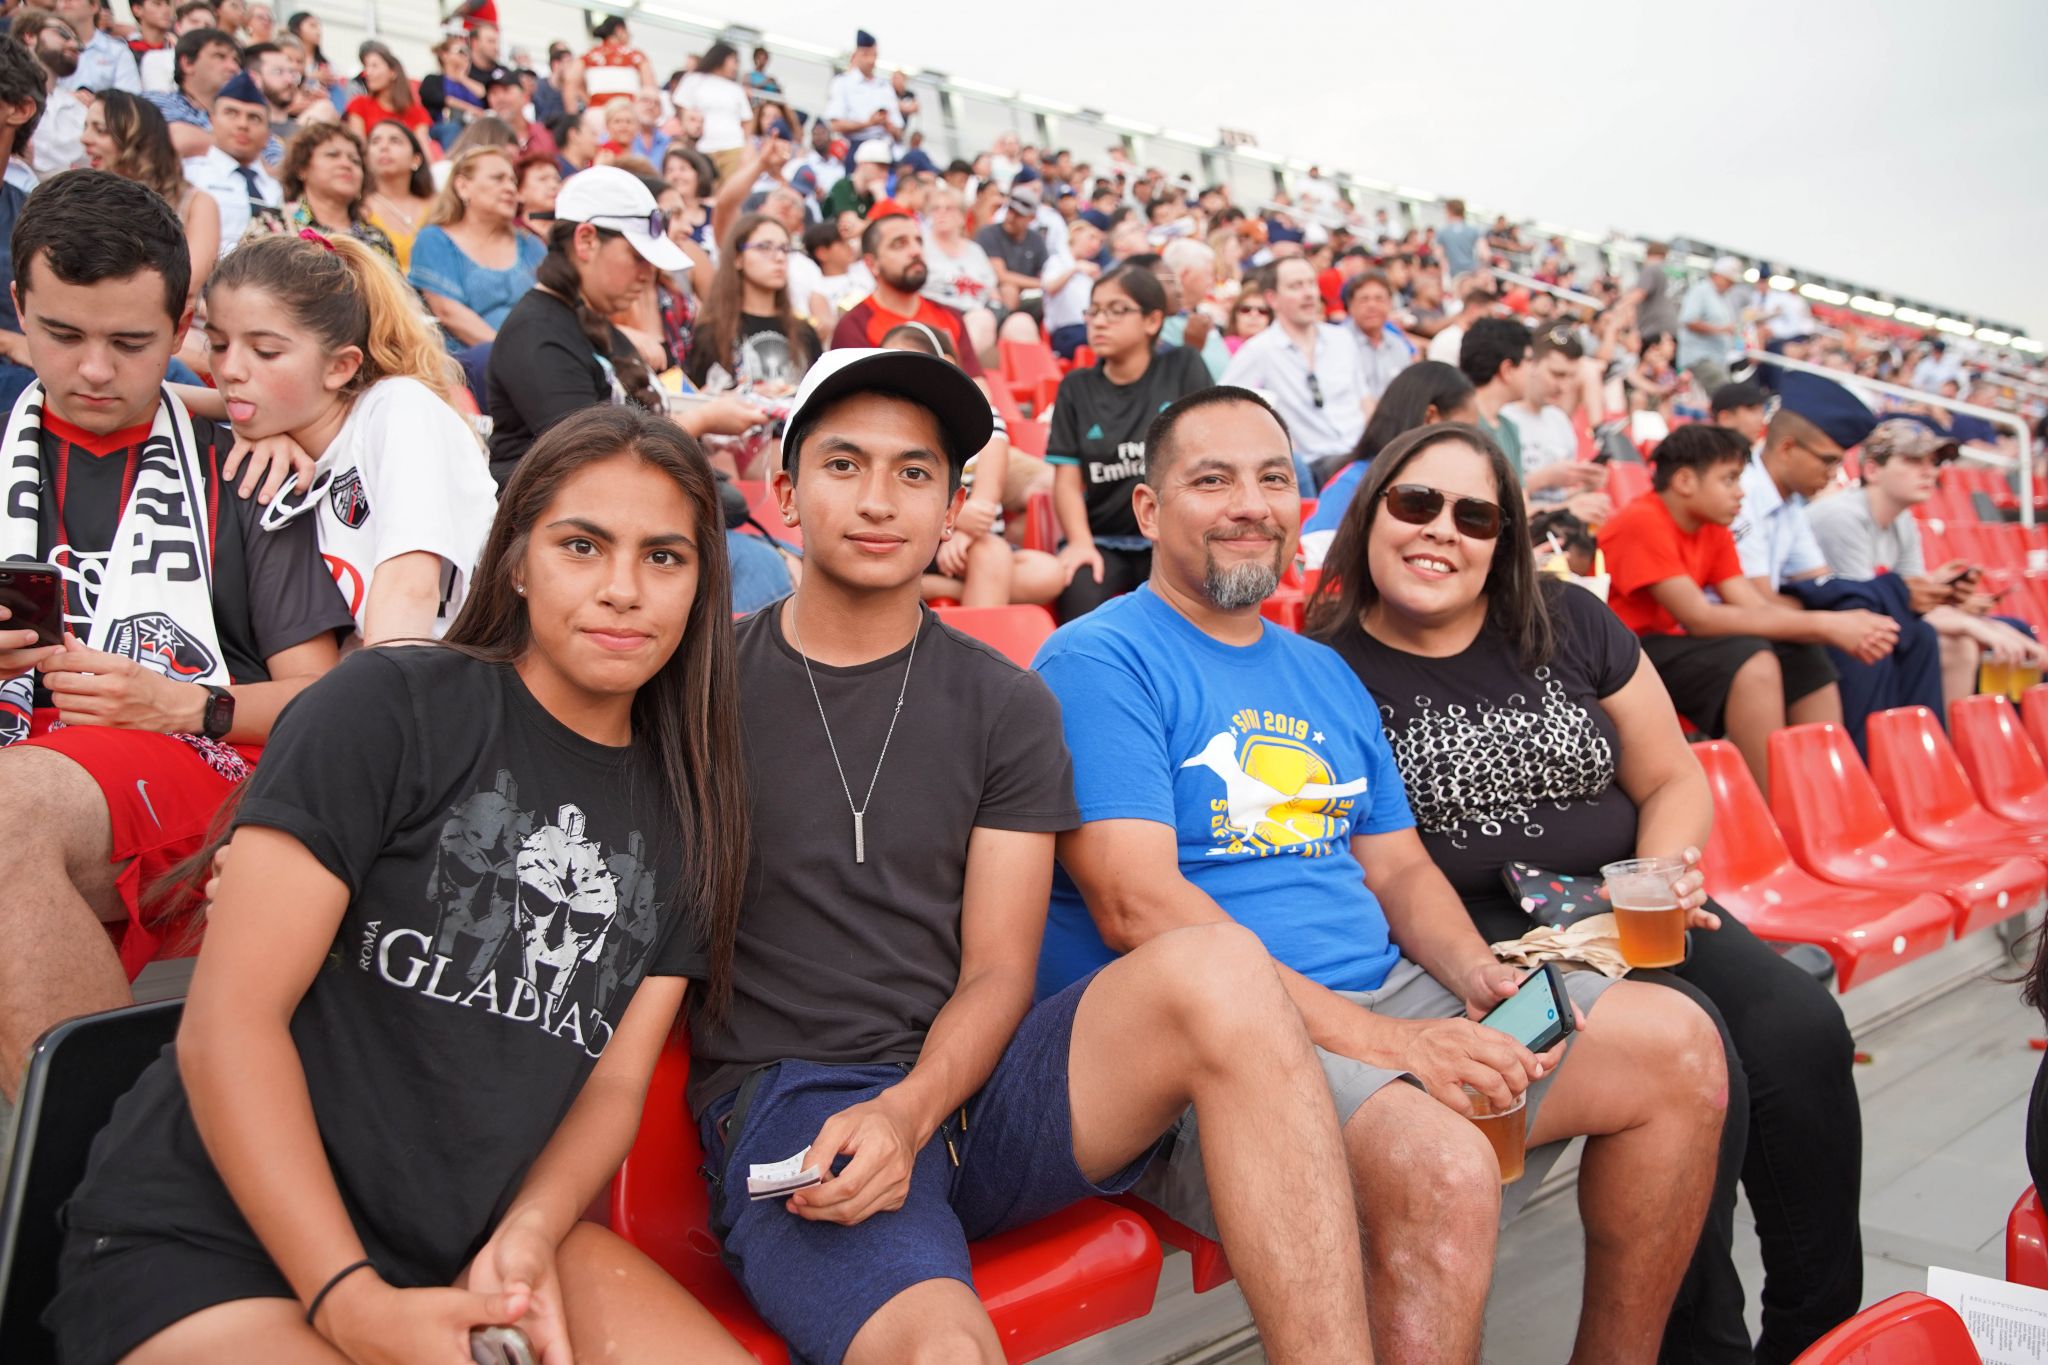 San Antonio FC fans will get a serape-inspired soccer scarf with